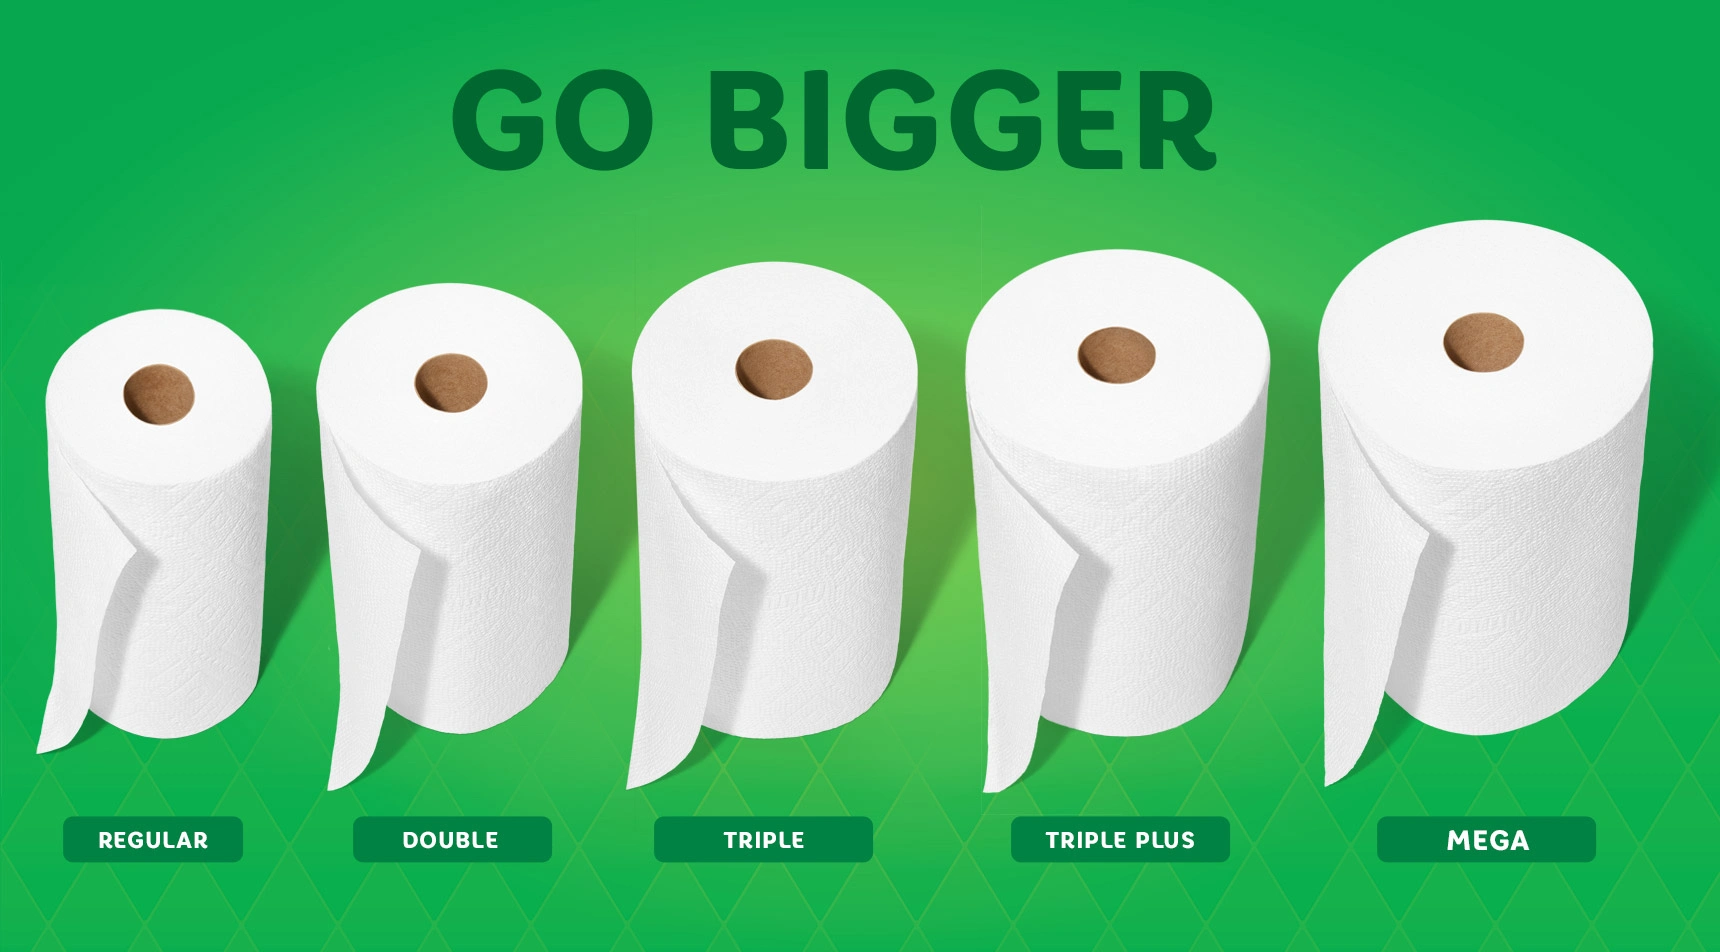 Which Roll Size is for you